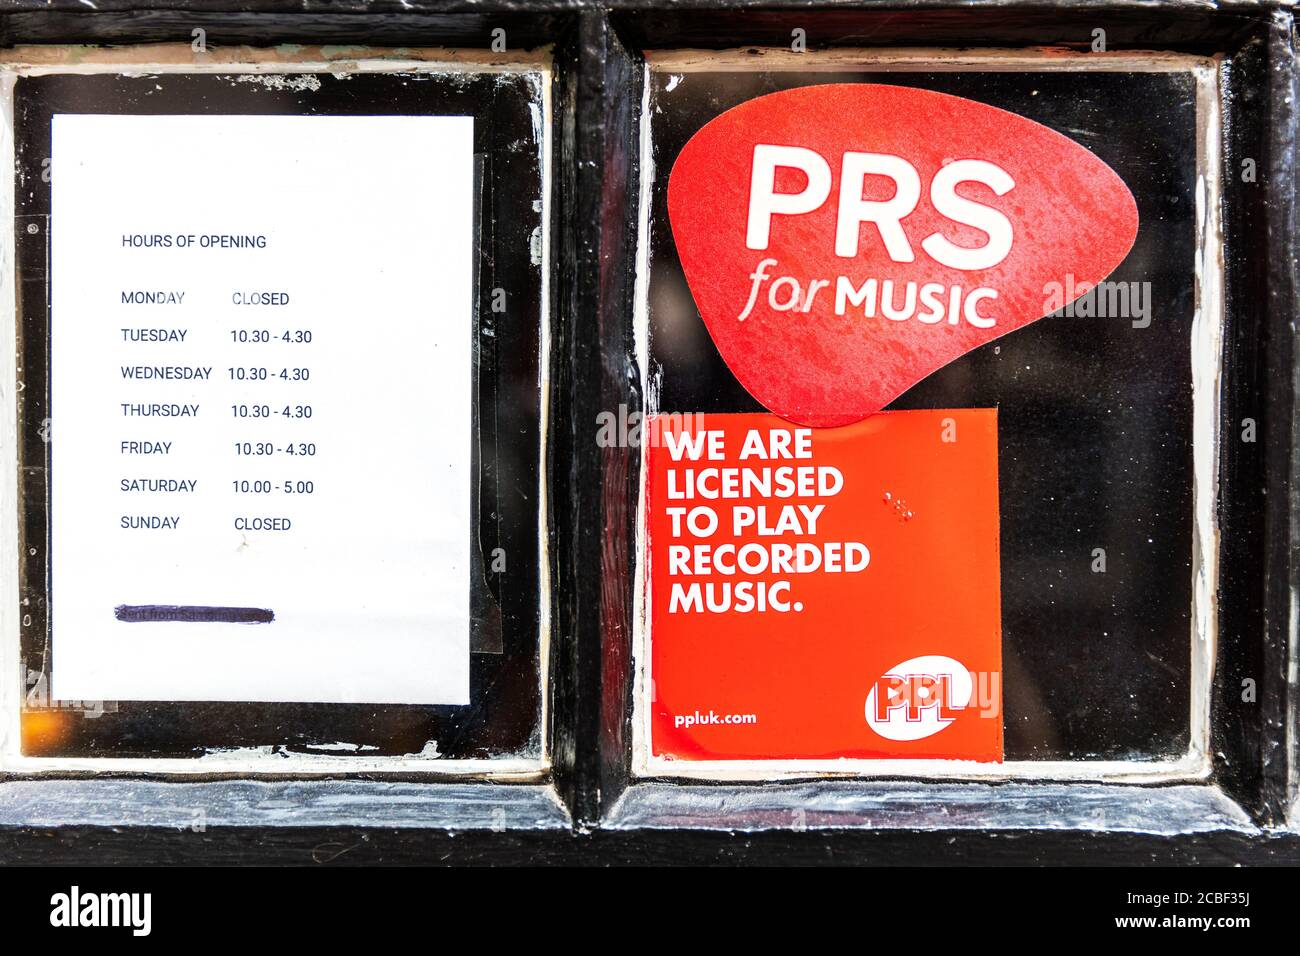 PRS for music, prs, ppl, performing rights society, music license, ppl music licence, licence, PPL PRS, license, music licence, public music licence, Stock Photo